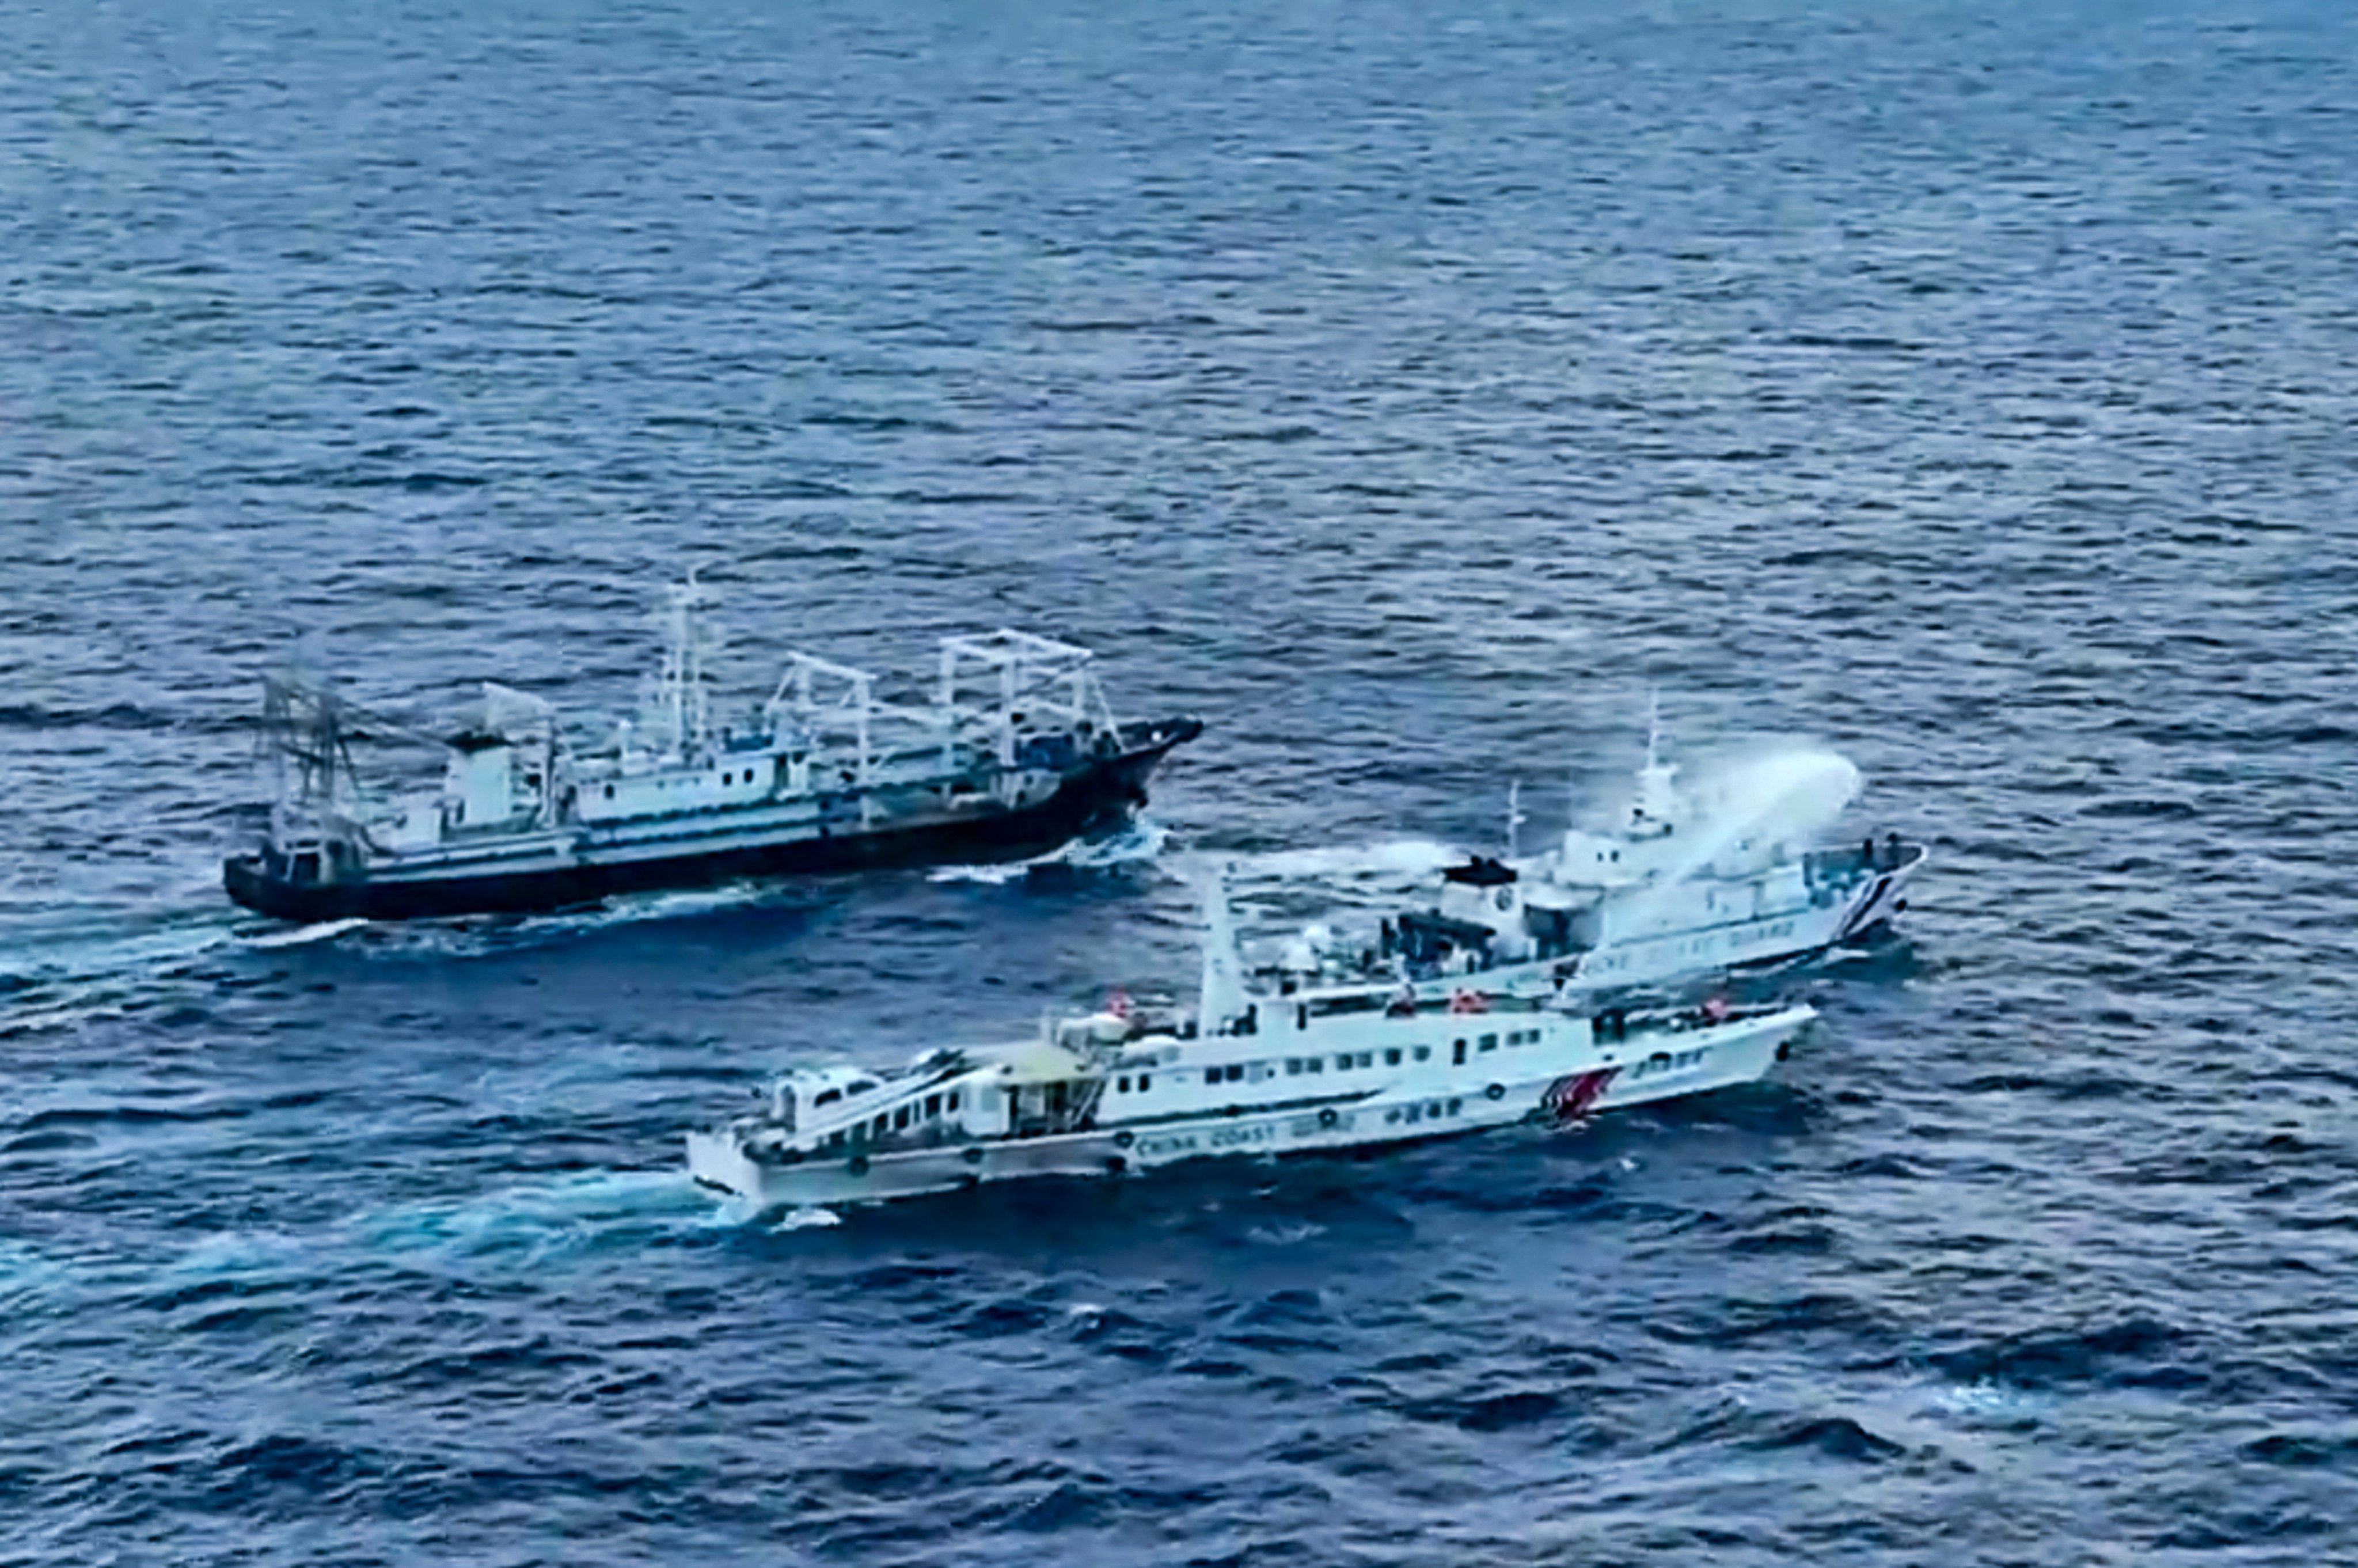 After months of friction near Second Thomas Shoal in the South China Sea, senior officials agreed to “further improve maritime communication”. Photo: Philippine Coast Guard